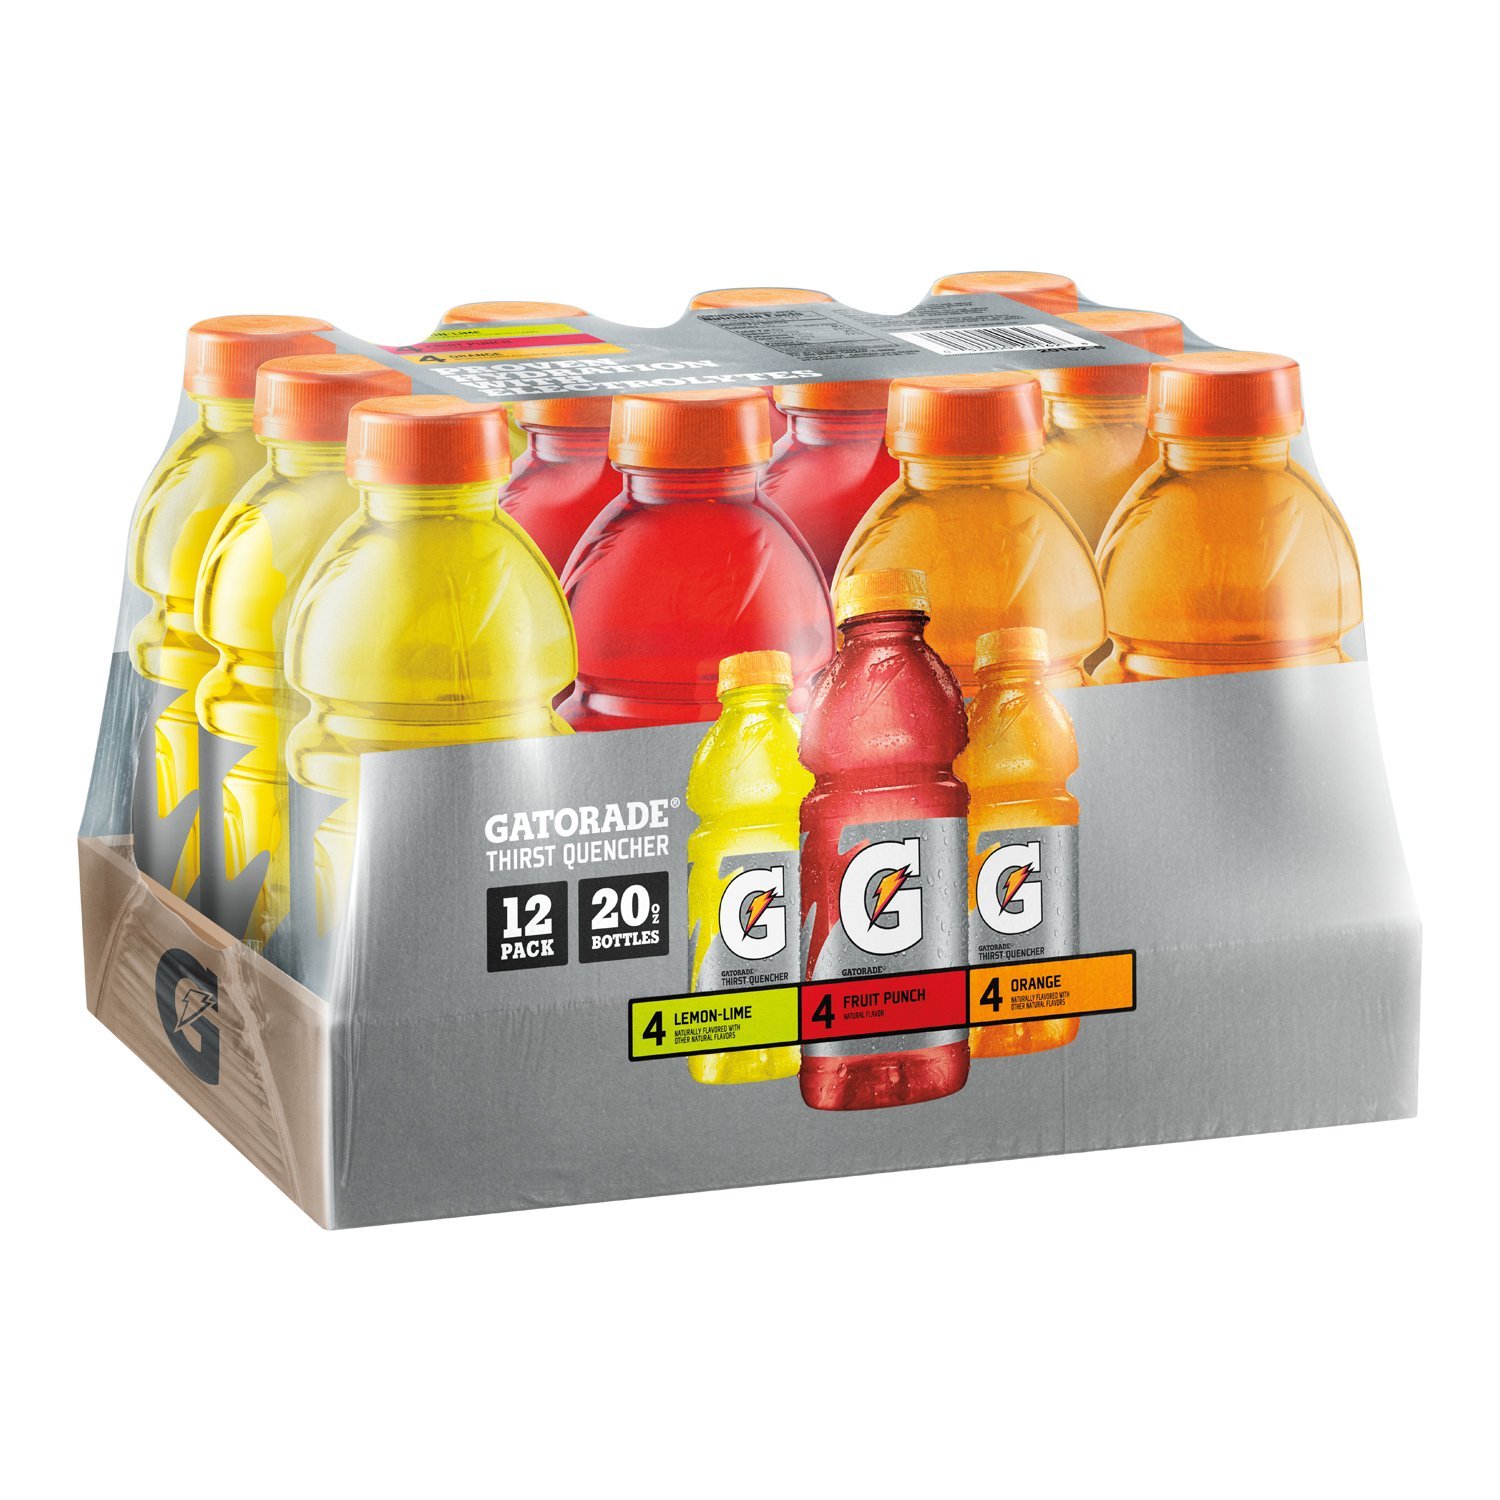 Gatorade Original Thirst Quencher Variety Pack (Pack of 12) Only $9.05 Shipped!